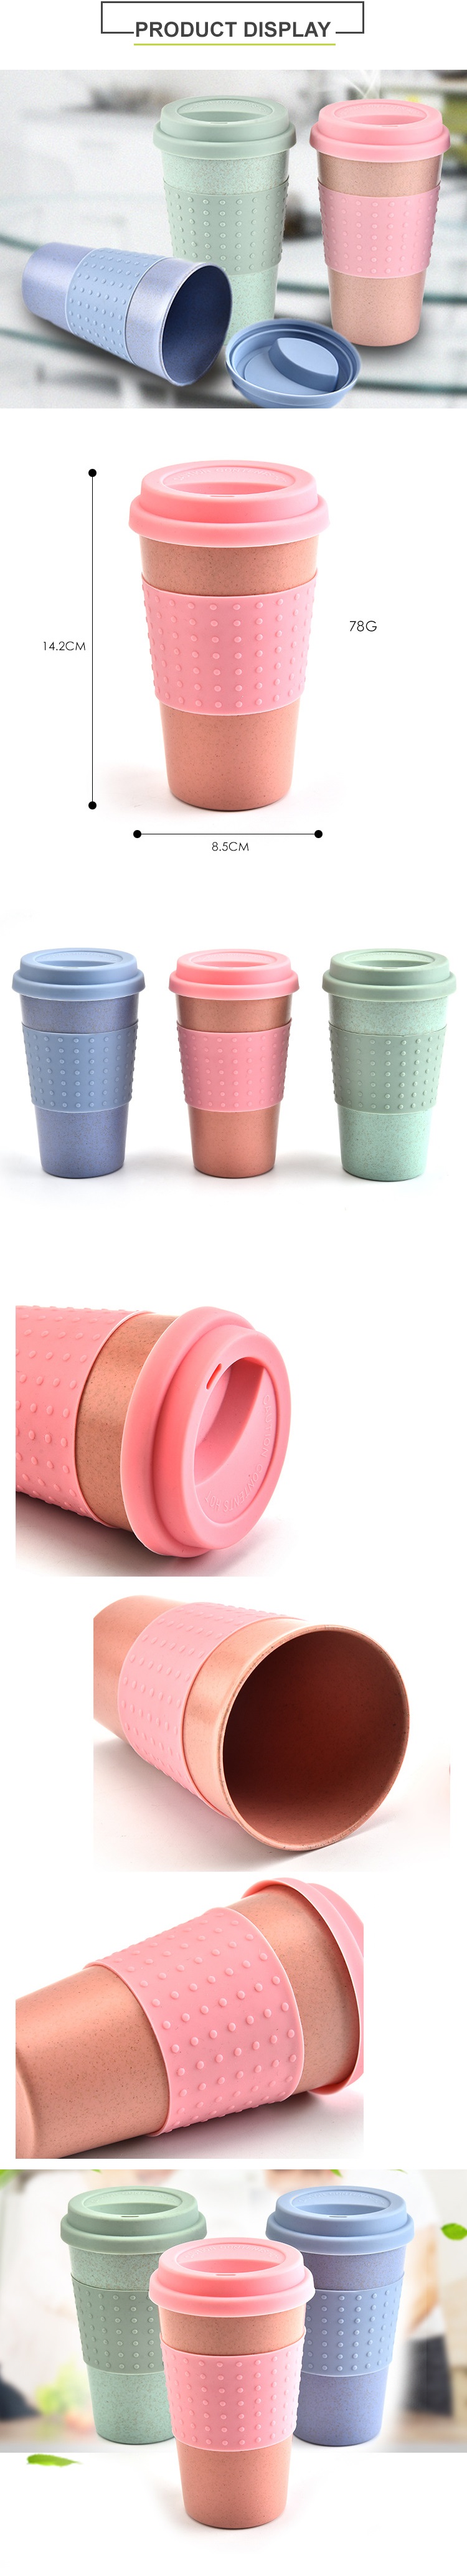 Hot sale natural eco friendly reusable biodegradable plastic pla wheat straw fiber mugs with lid for travel